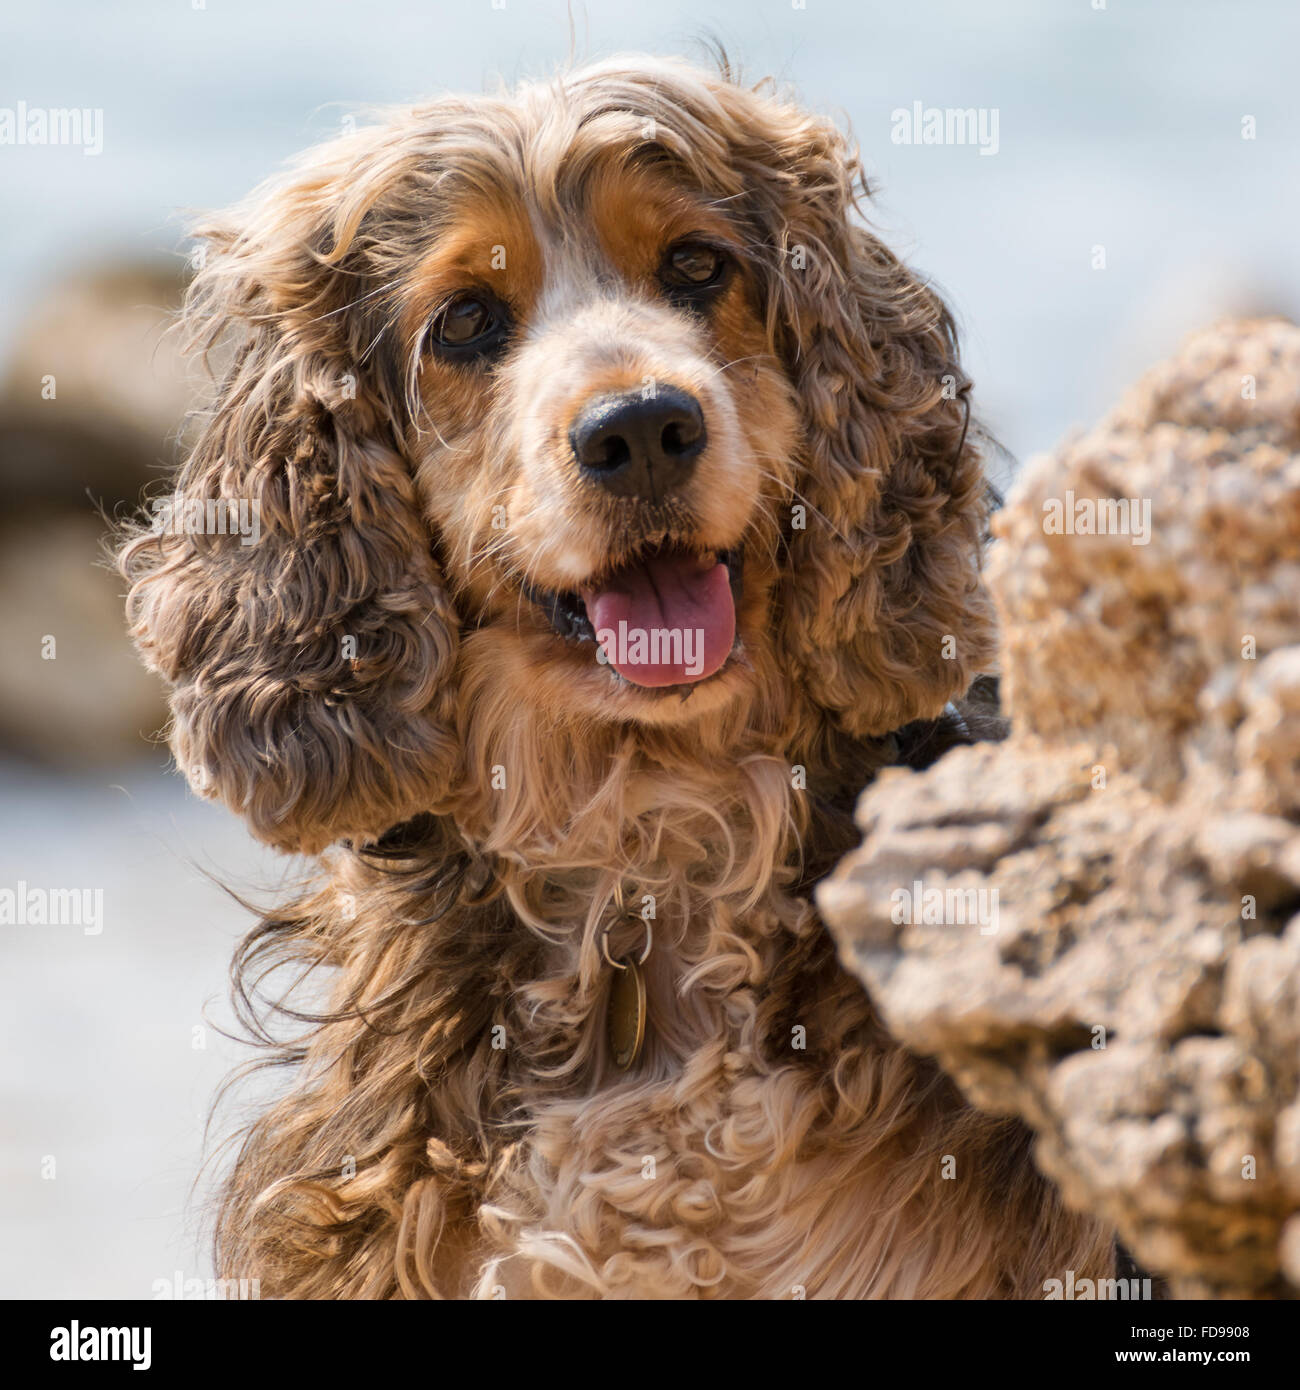 Brown little dog shows tongue behind a rock. Stock Photo